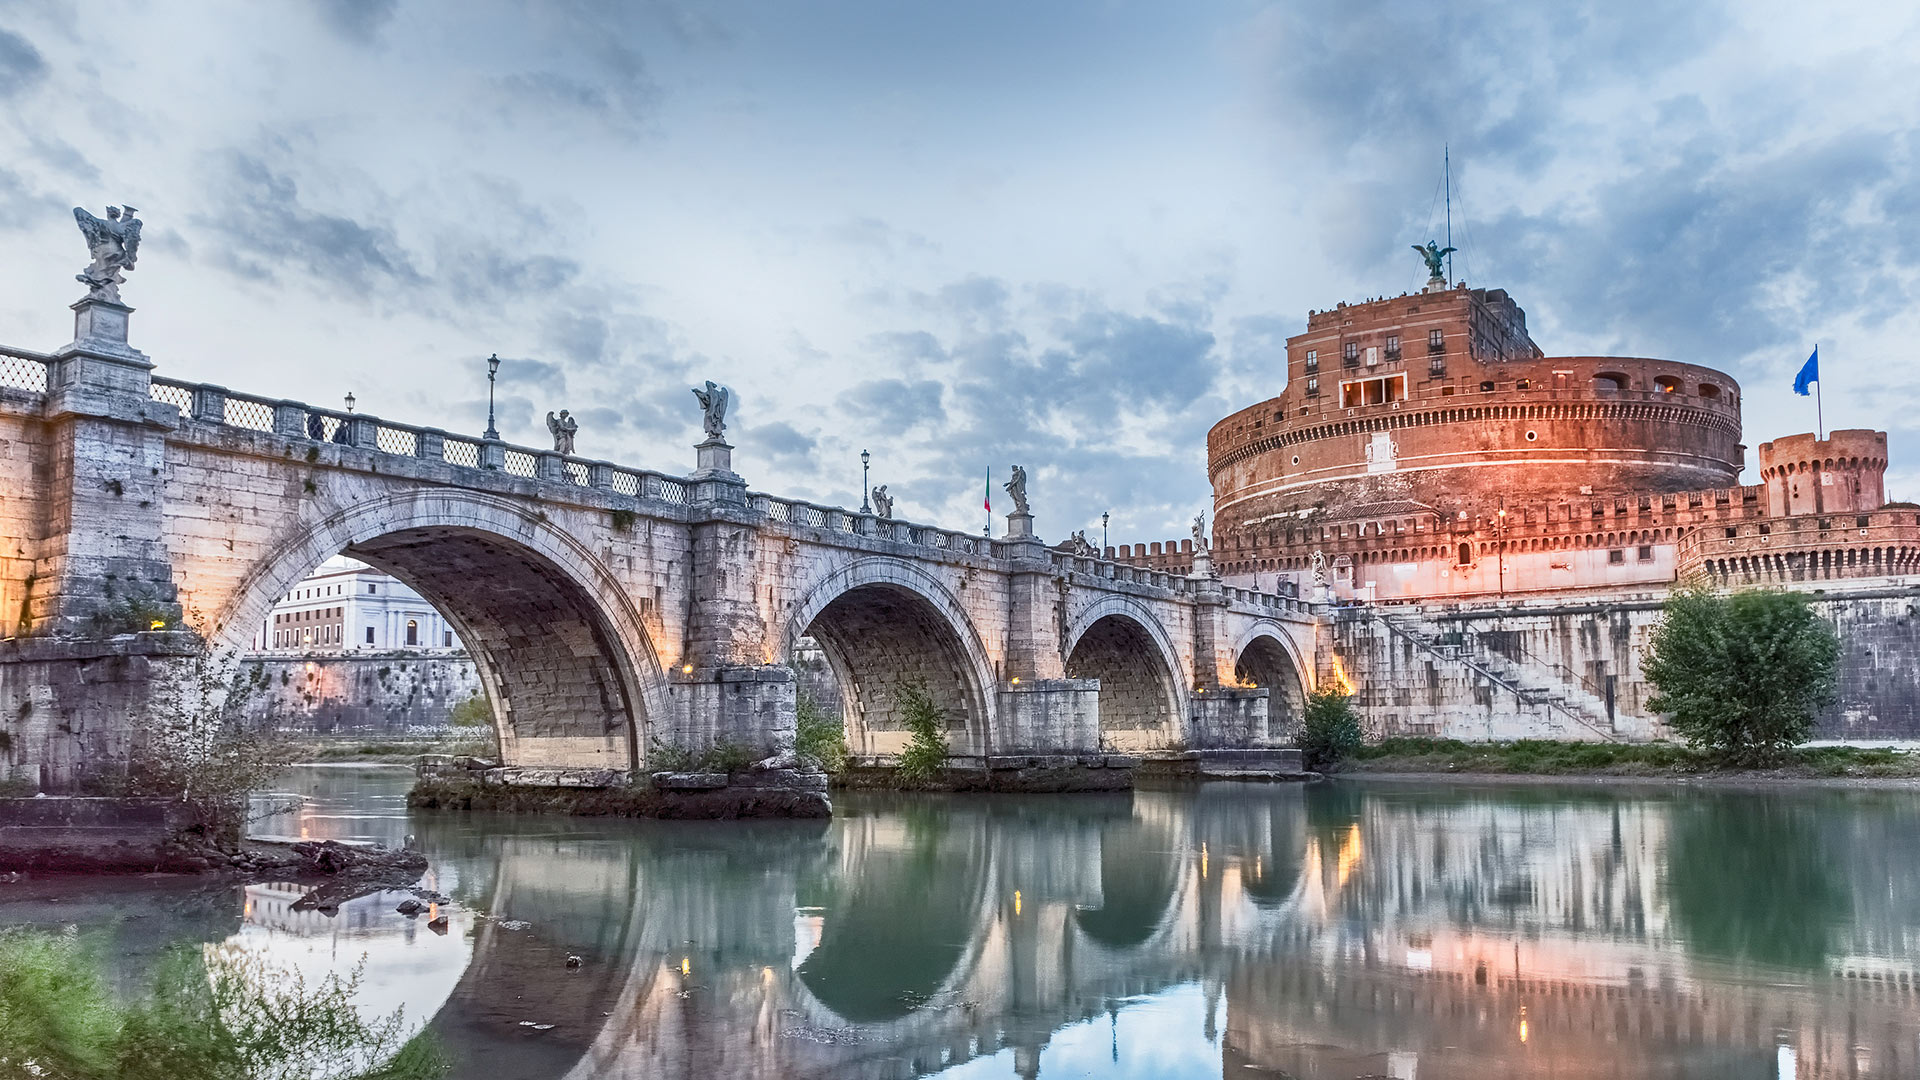 View of Sant'Angelo fortress and bridge in Rome, Italy